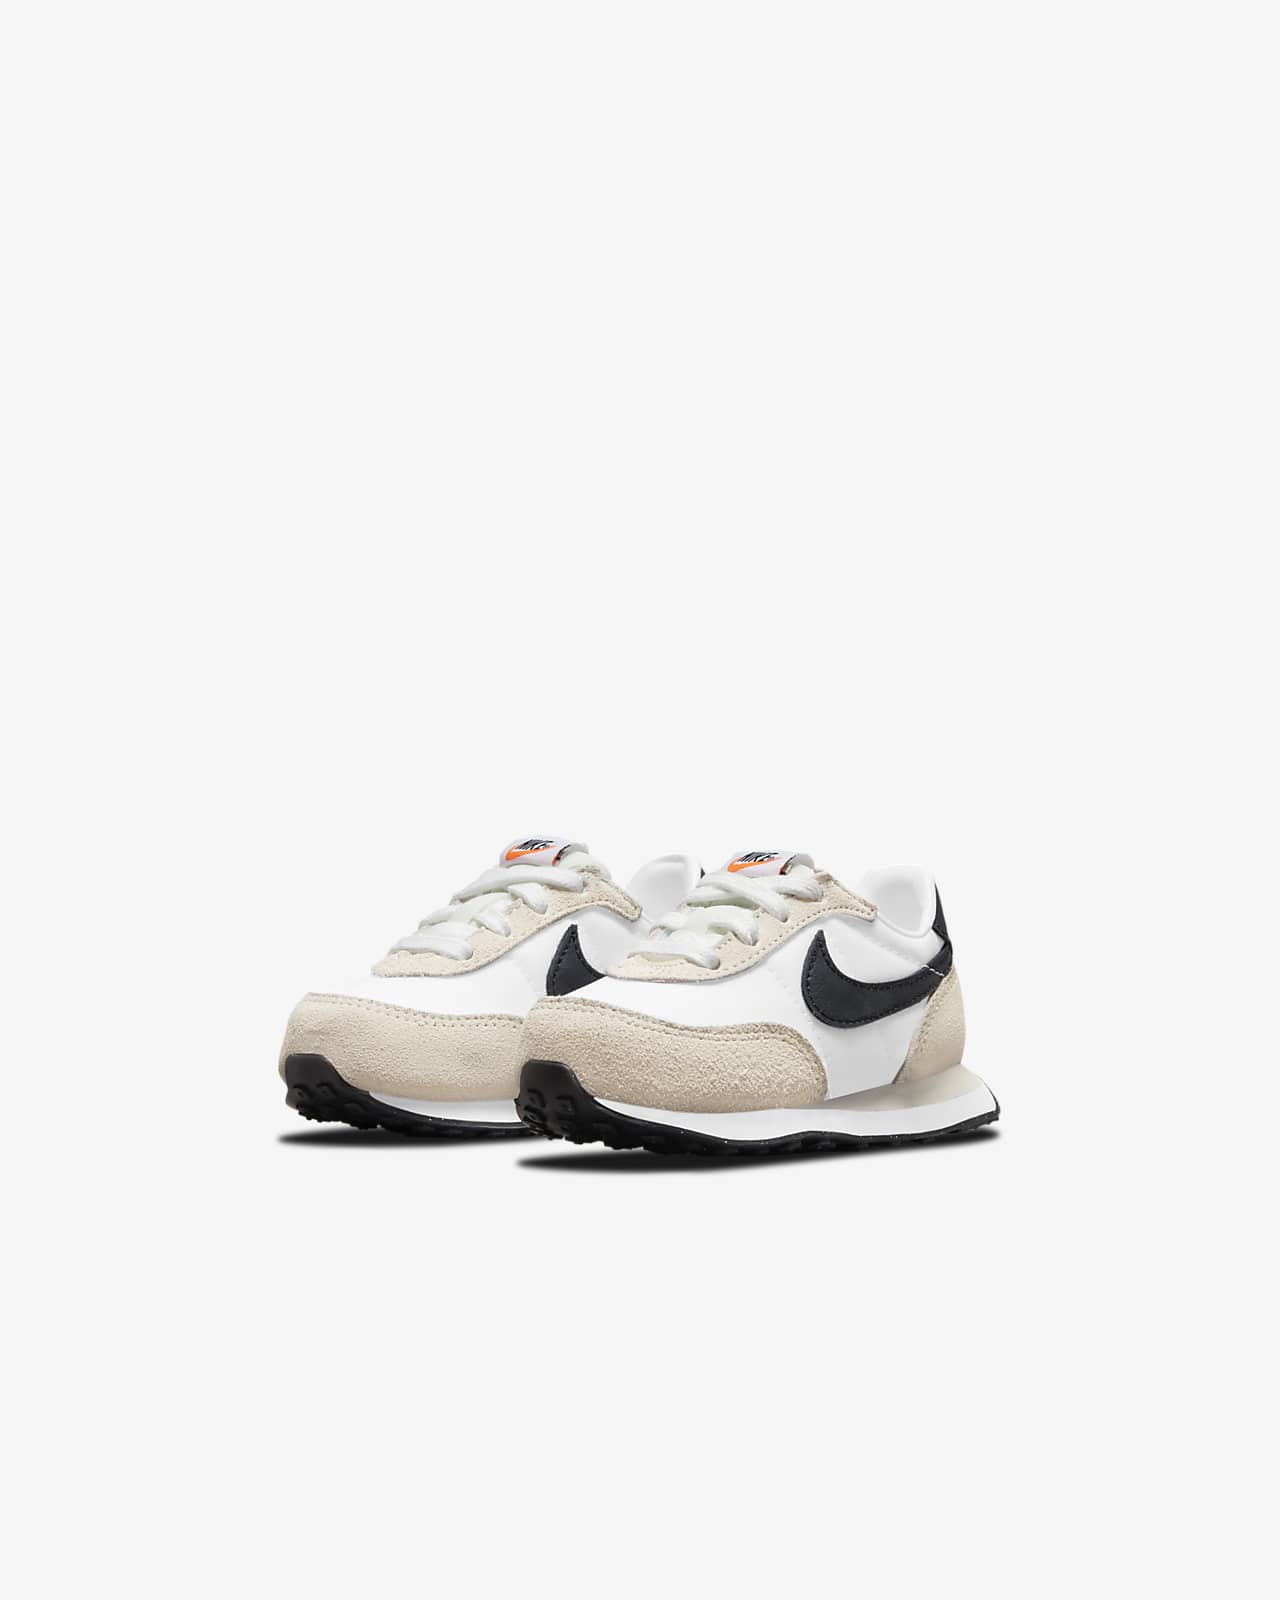 Nike Waffle Trainer 2 Circa 72 Baby/Toddler Shoes